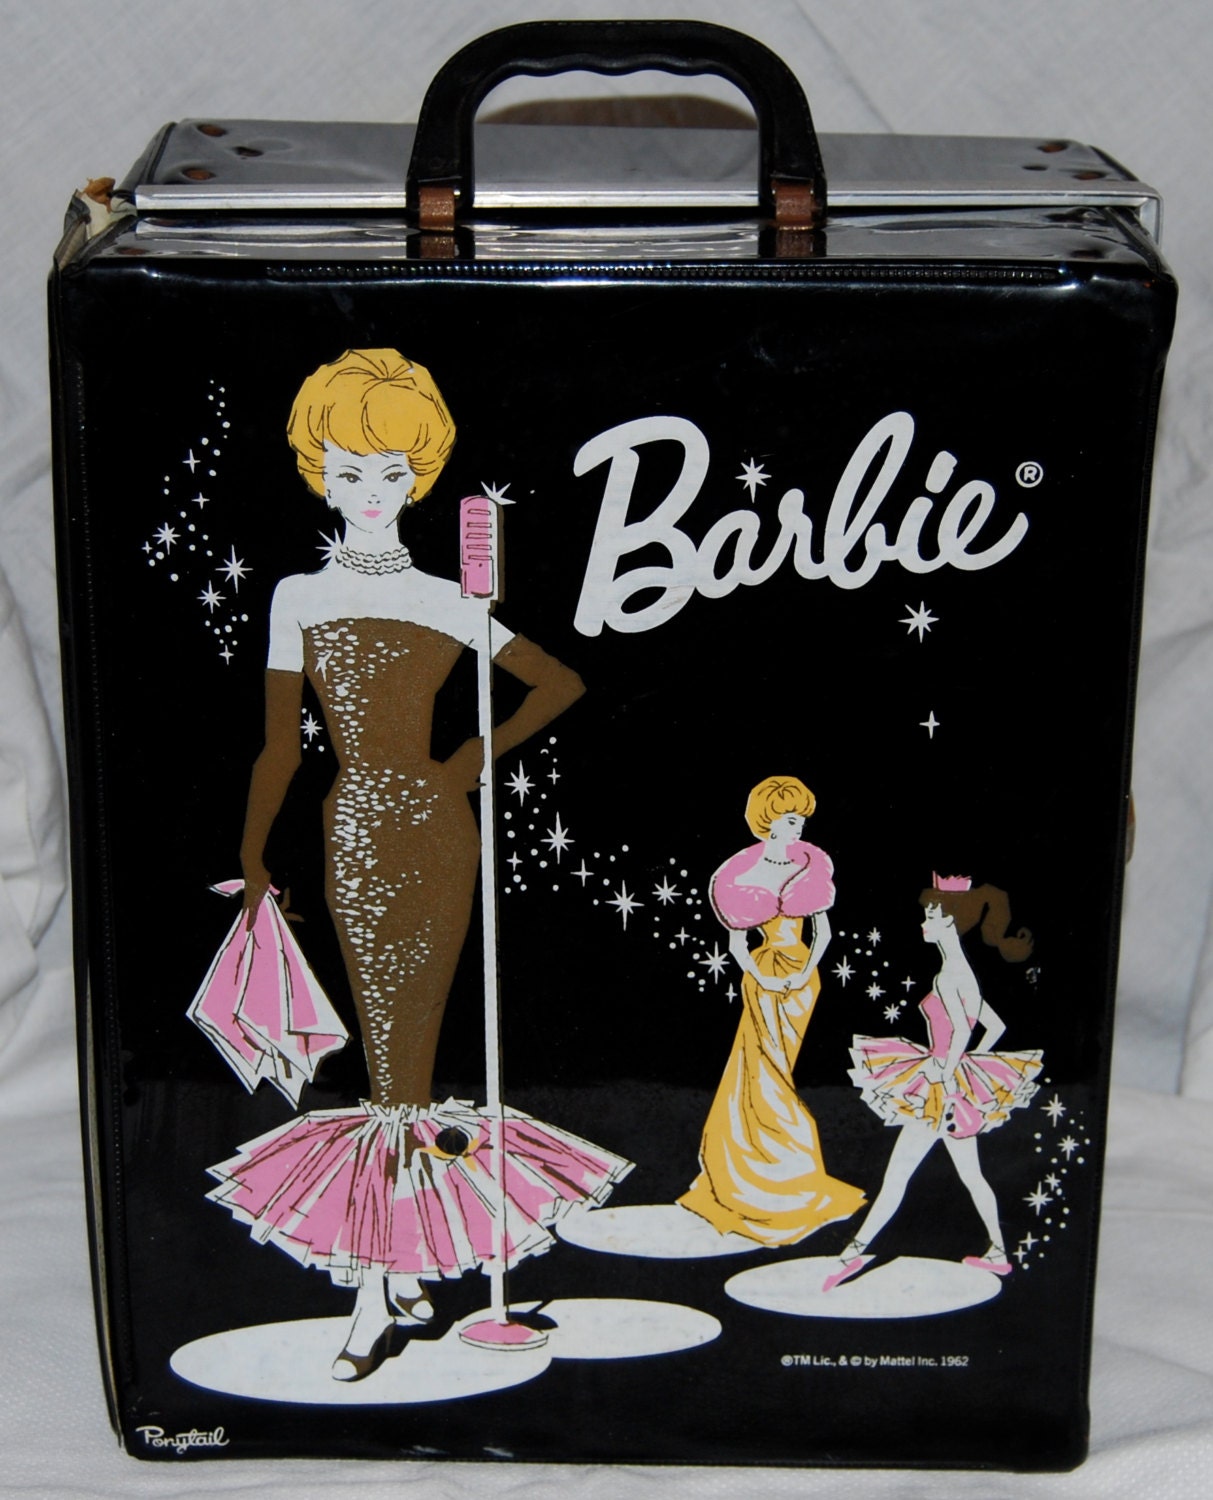 Vintage BARBIE Doll Black Carrying Case. Made in 1962 by